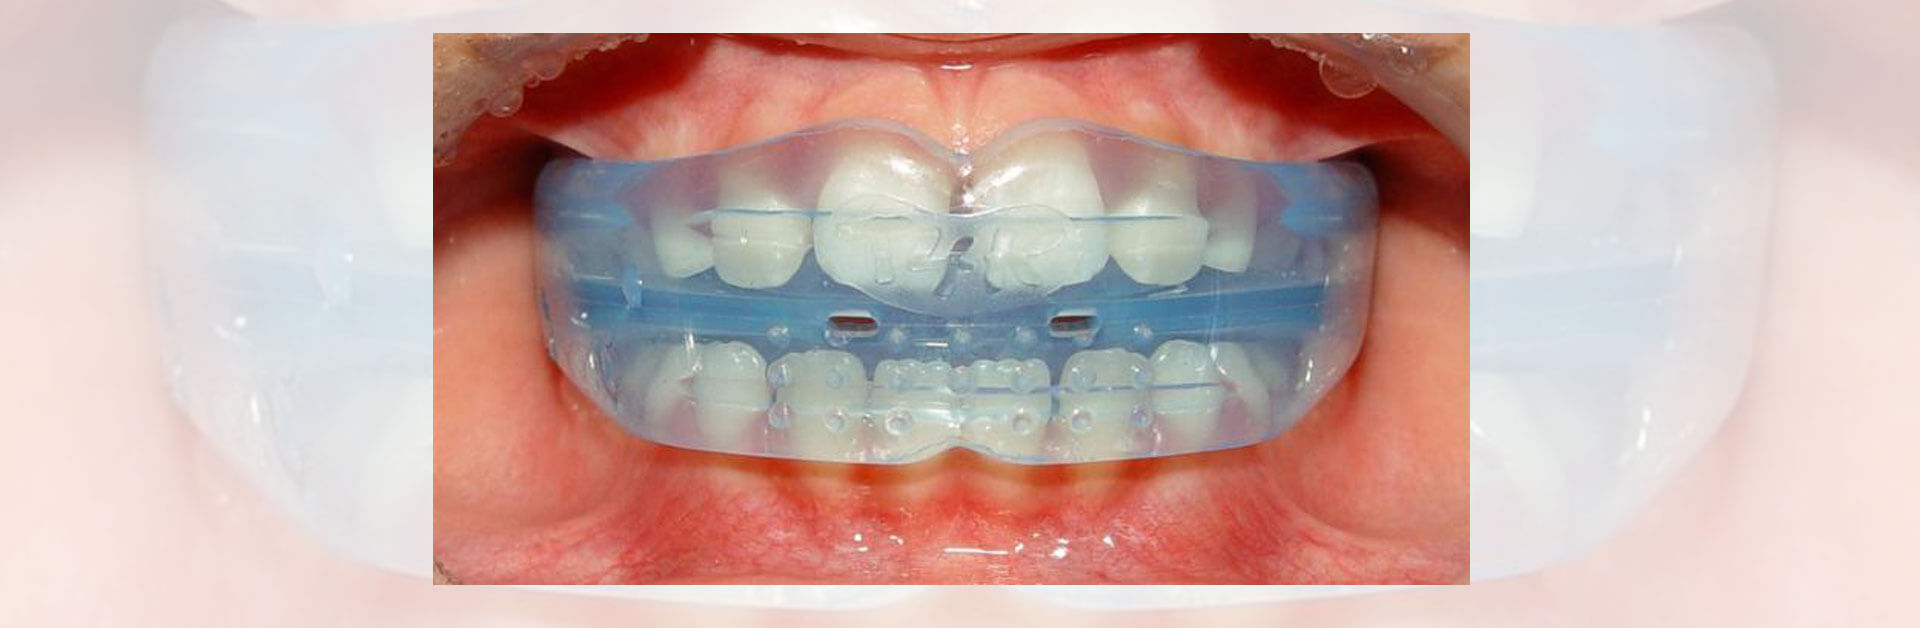 WHAT CAUSES CROOKED TEETH? HOW SOON CAN YOU CORRECT THEM?